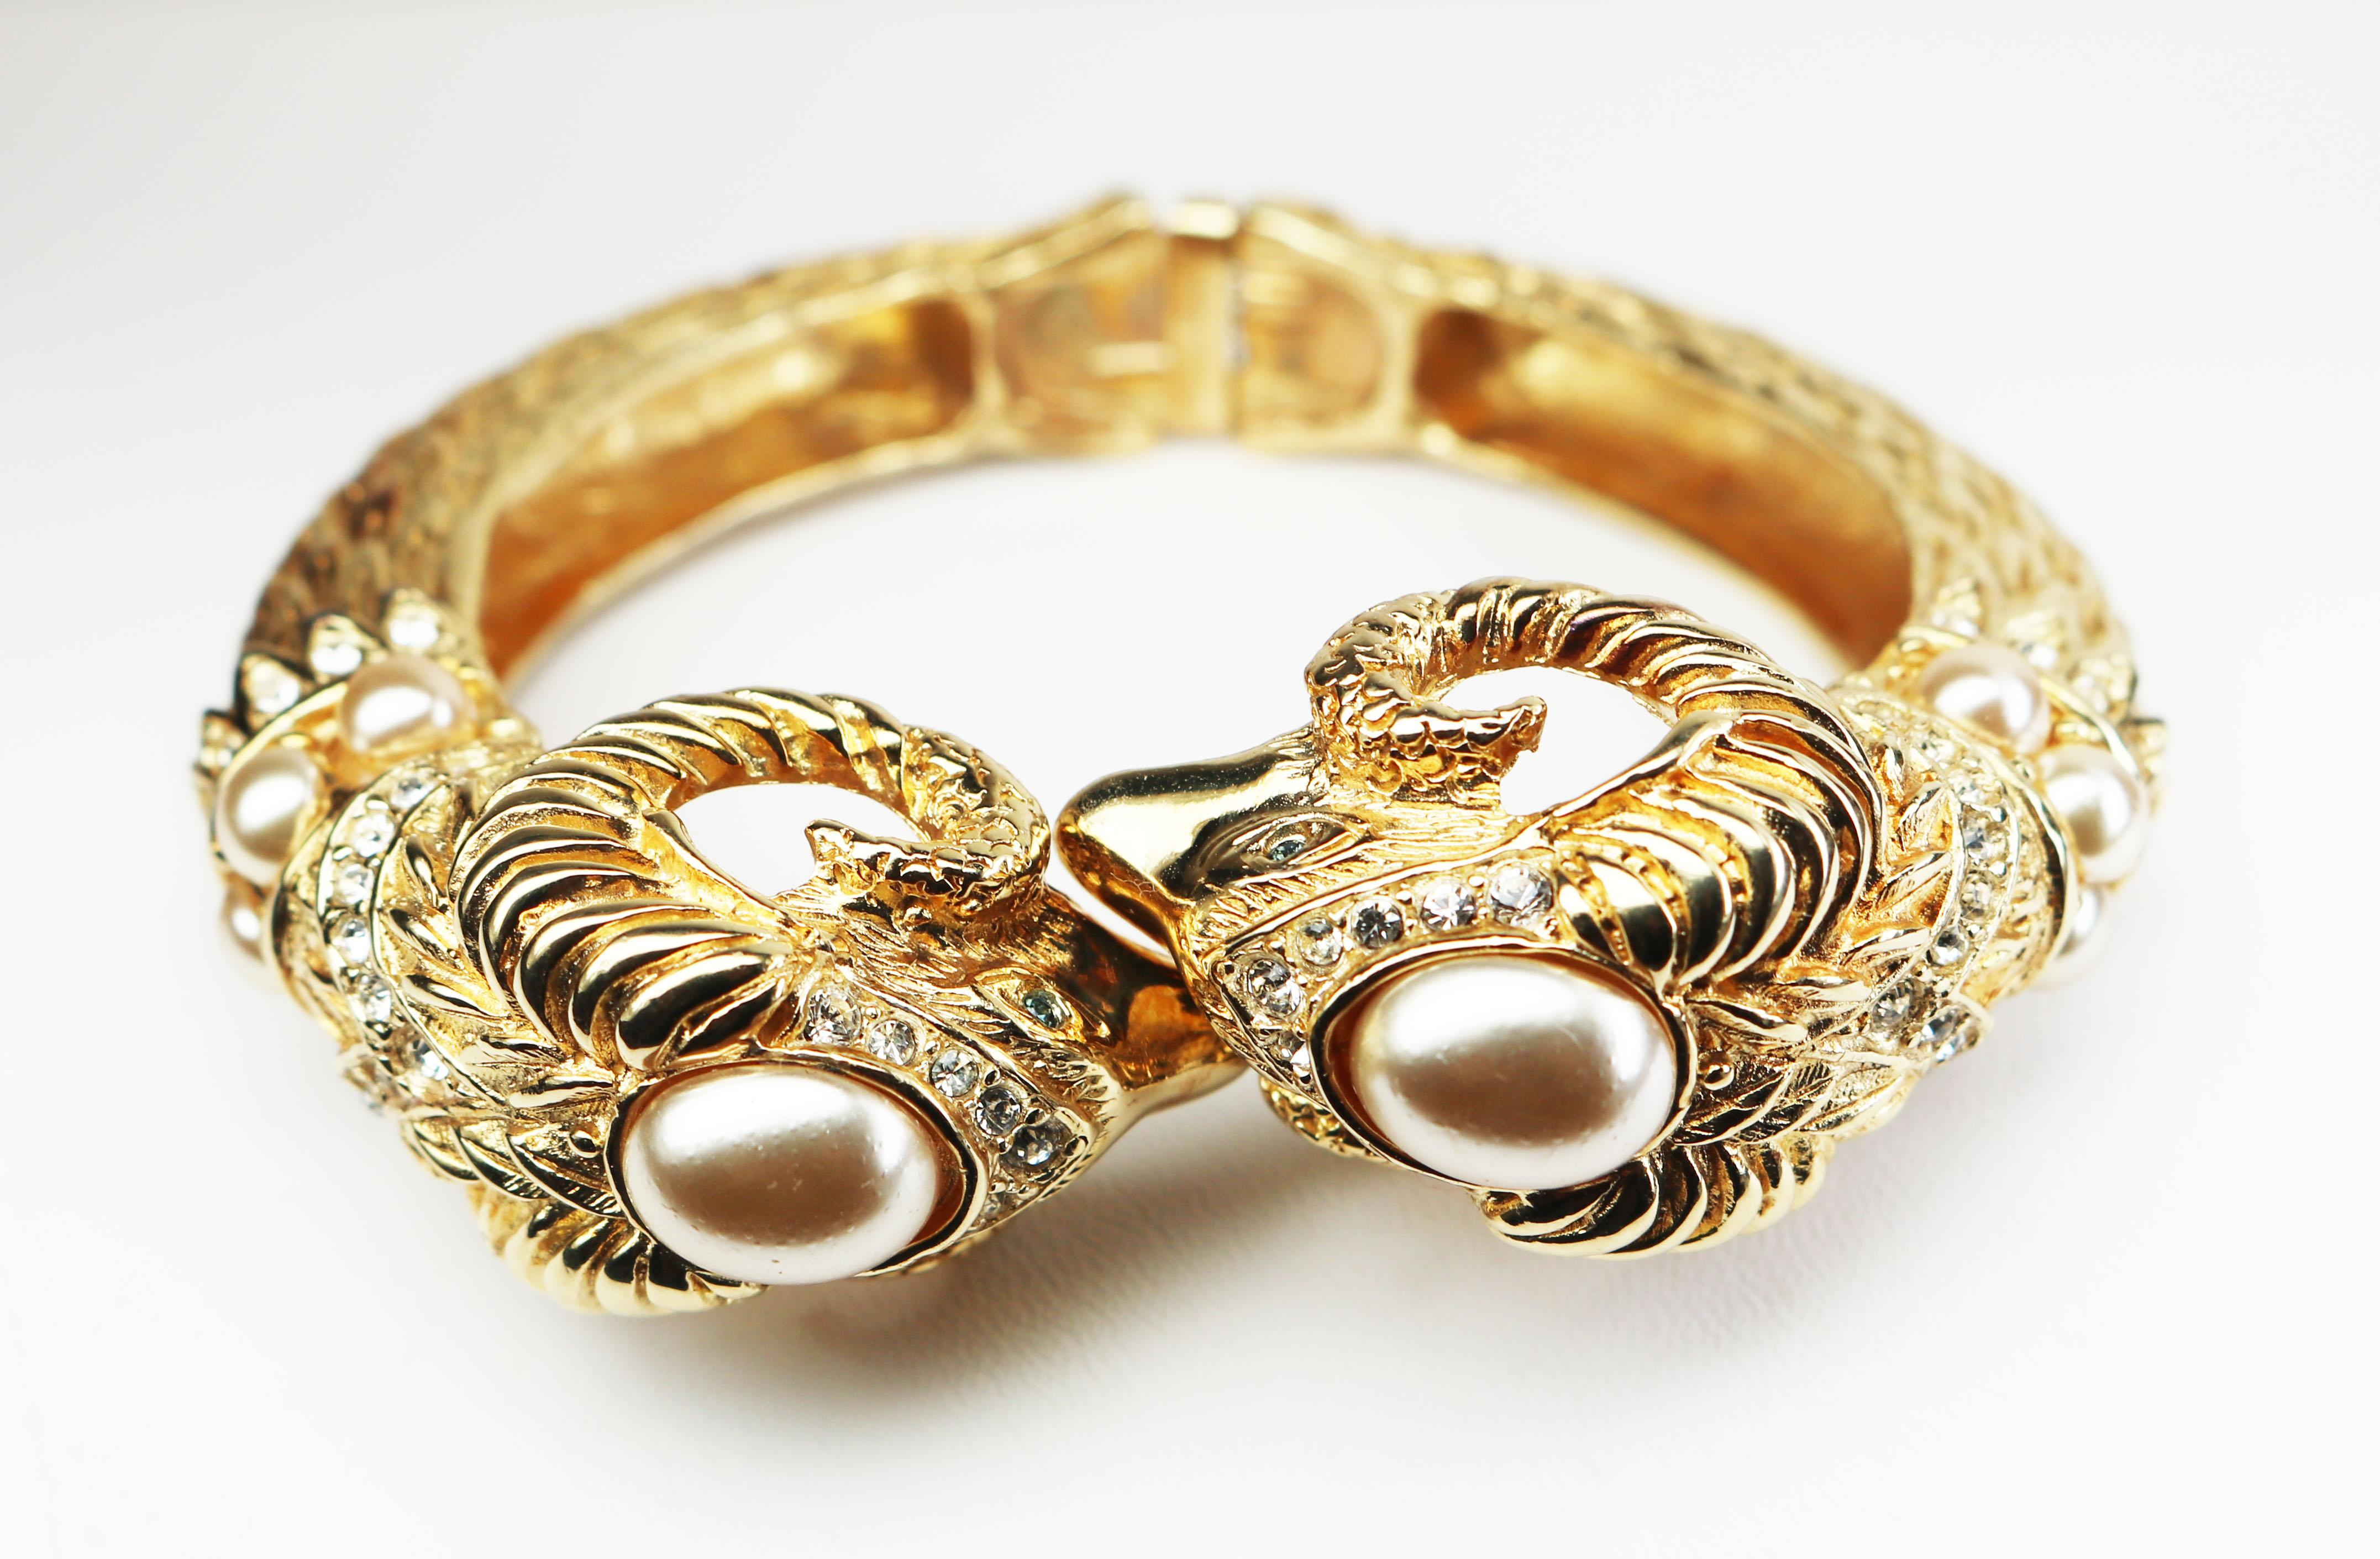 This highly collectible bracelet features two matching sculptured, gold plated ram’s heads with simulated pearl embellishments and encrusted with clear rhinestones and four stunning green rhinestone eyes. You’ll find this piece truly breathtaking!